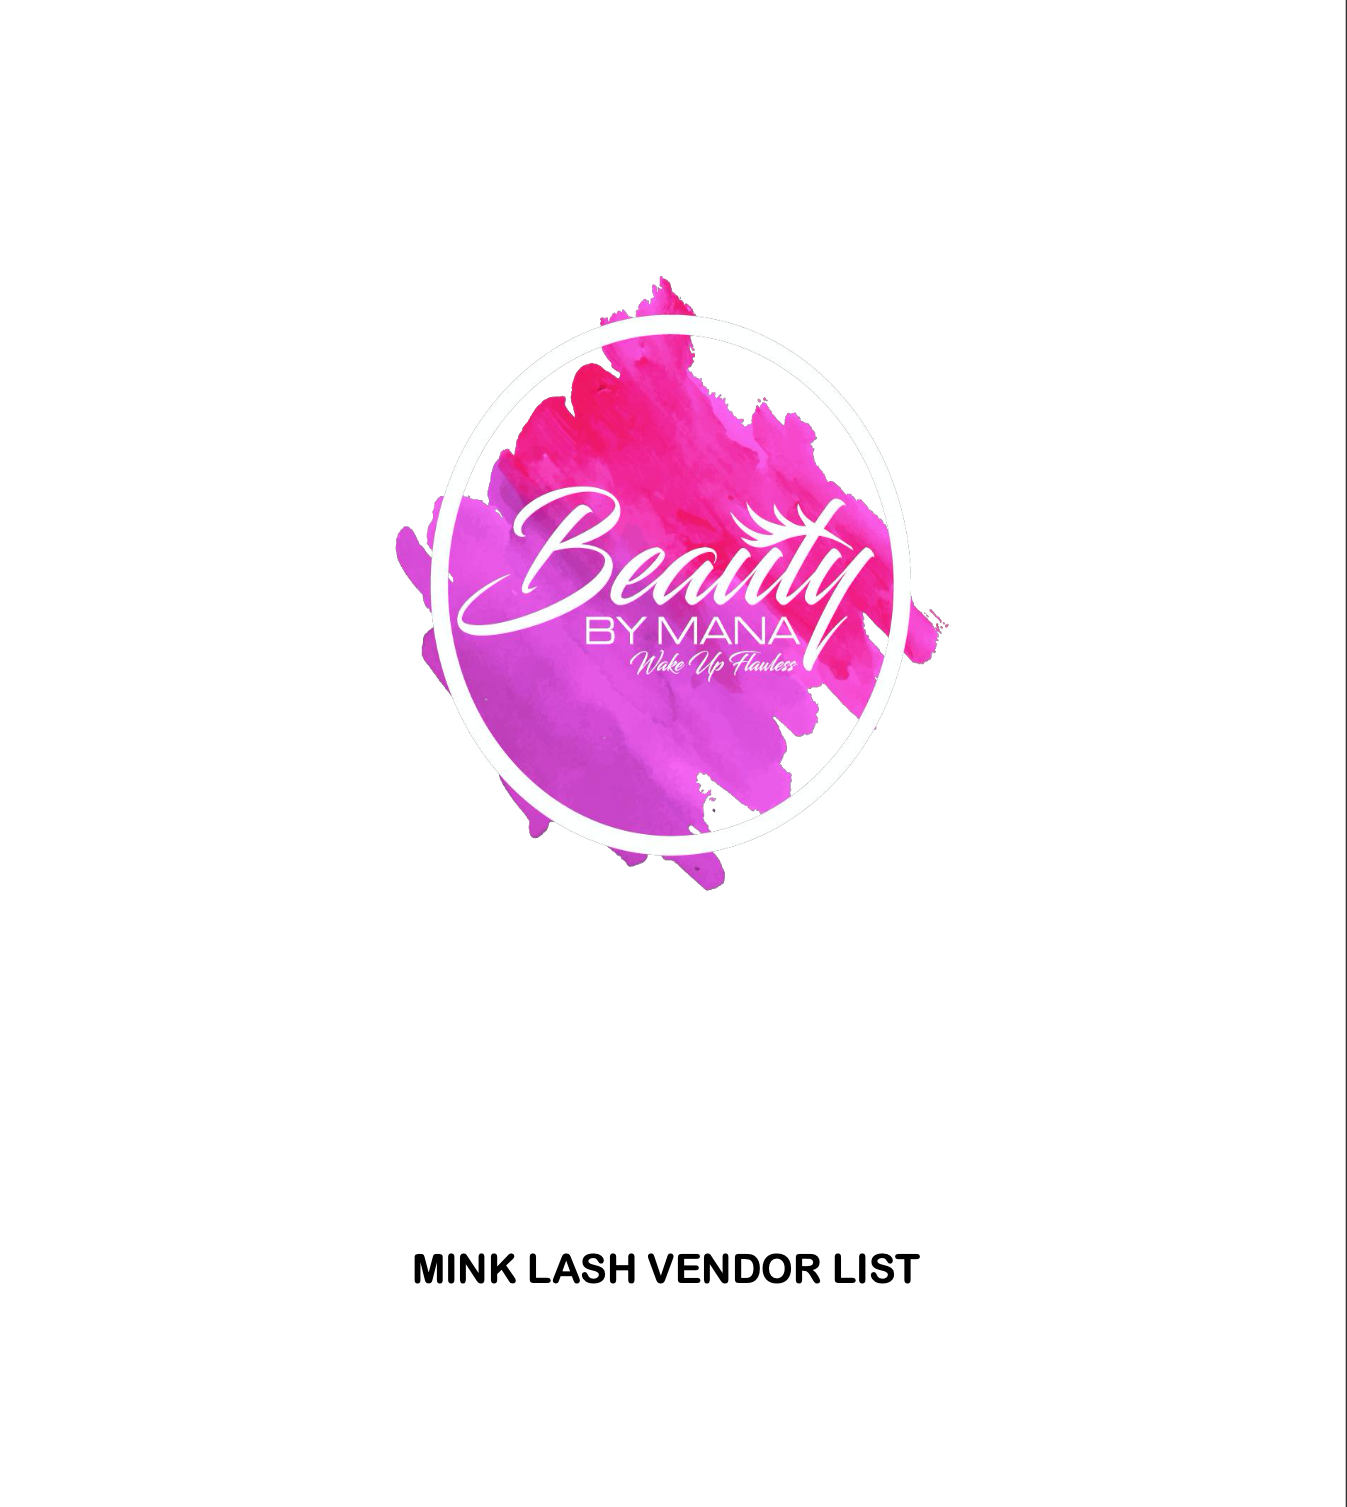 Start Your Own Product Line With Our Mink Lash Vendors List